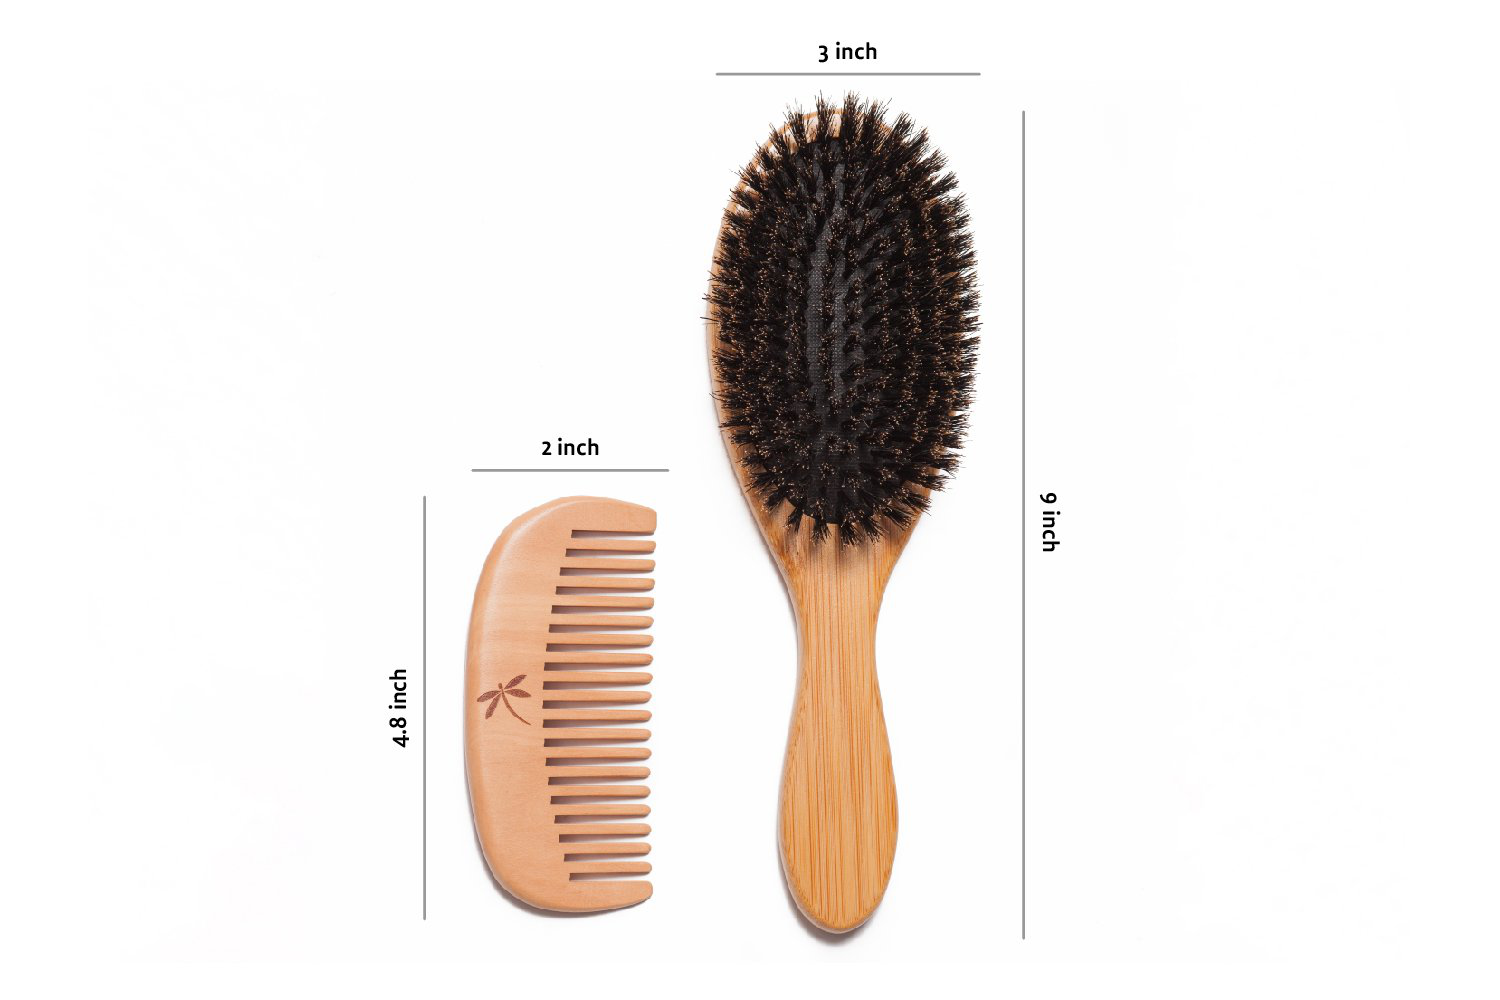 100% Boar Bristle Hair Brush Set. Soft Natural Bristles for Thin and Fine Hair. Restore Shine and Texture. Wooden Comb, Travel Bag and Spa Headband Included!